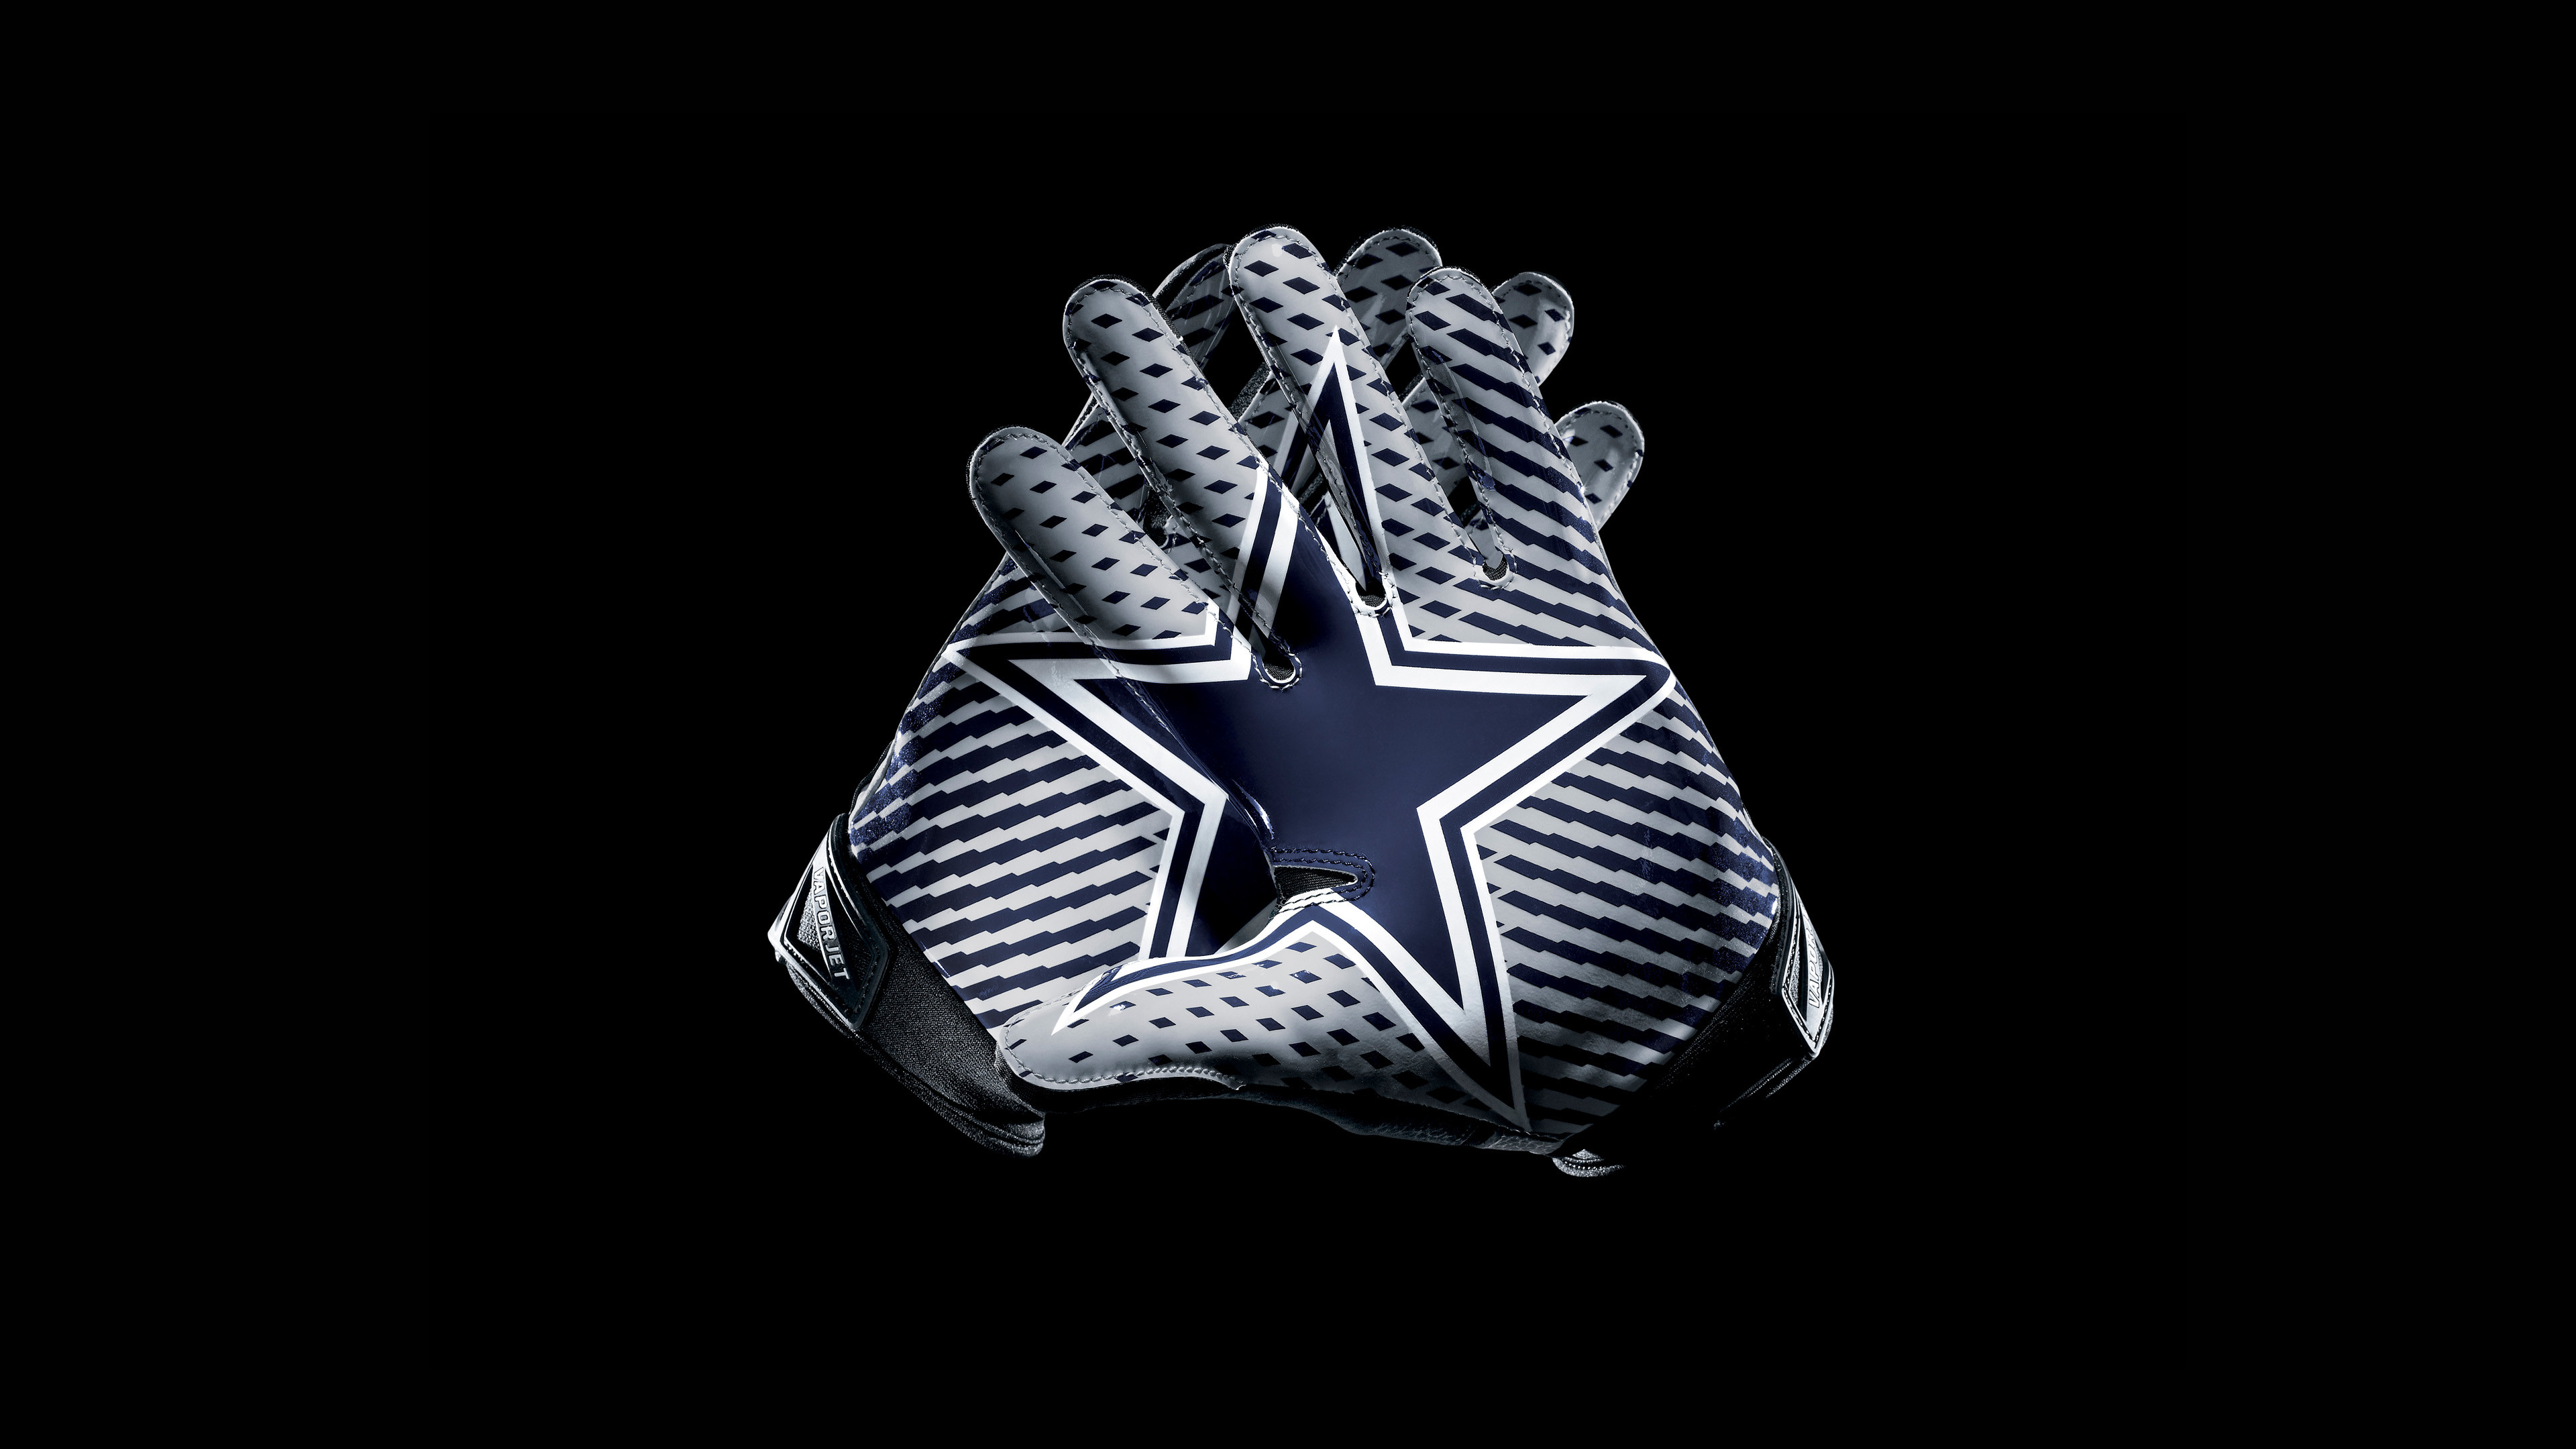 3840x2160 ... Dallas Cowboys Gloves Wallpaper for High Resolution Background Images  ...